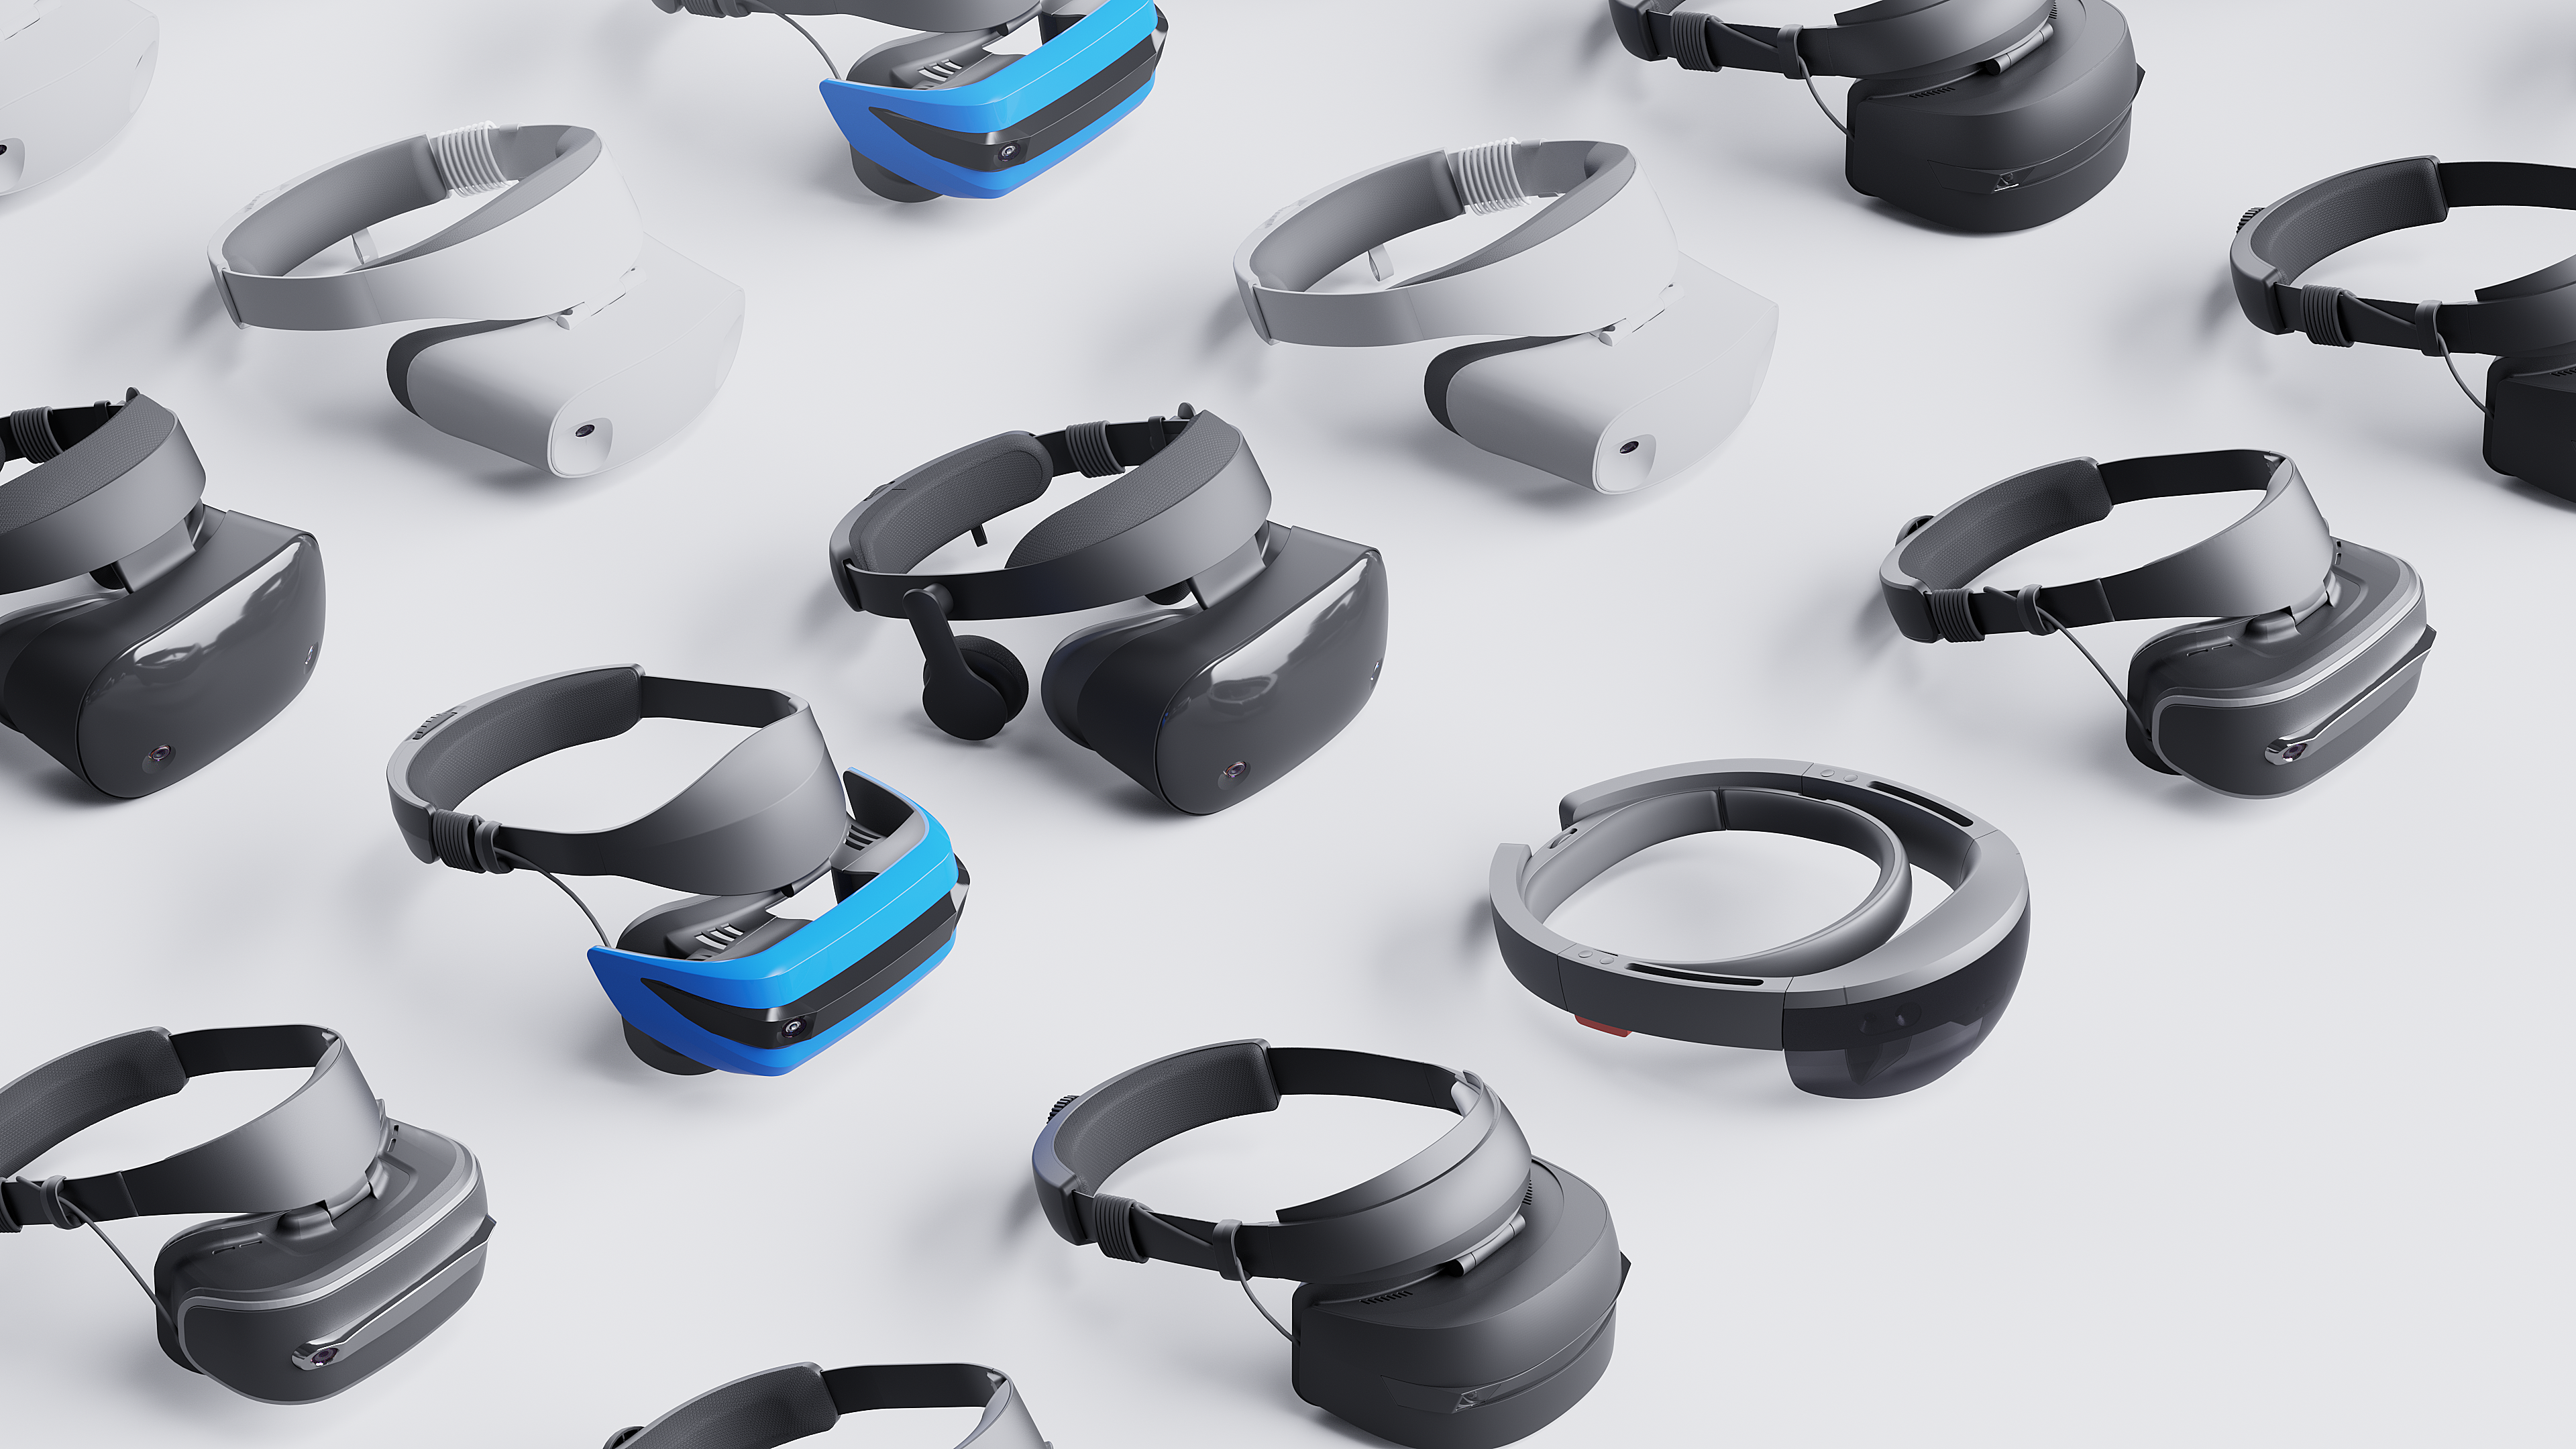 Collage of Windows Mixed Reality headsets from Acer, Dell, Lenovo, HP, and HoloLens